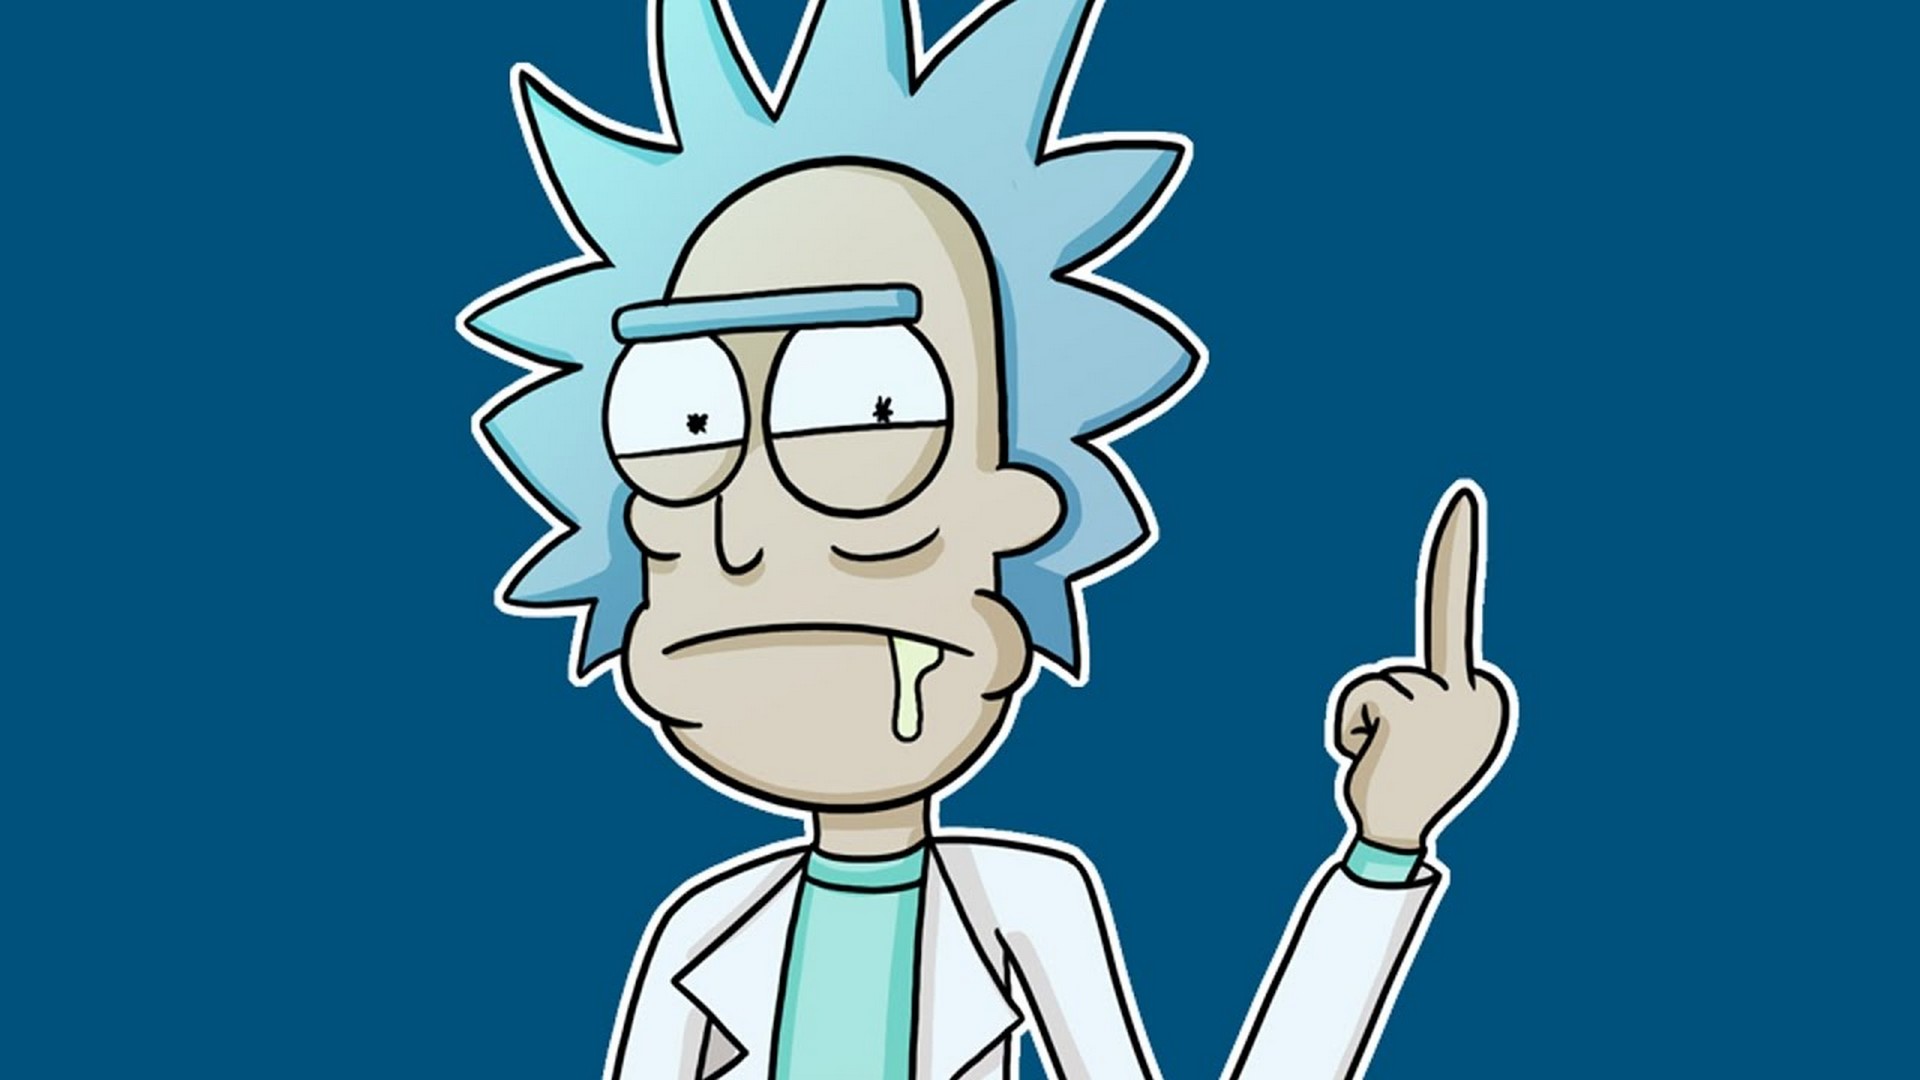 Wallpaper Rick and Morty Rick Desktop with resolution 1920X1080 pixel. You can use this wallpaper as background for your desktop Computer Screensavers, Android or iPhone smartphones